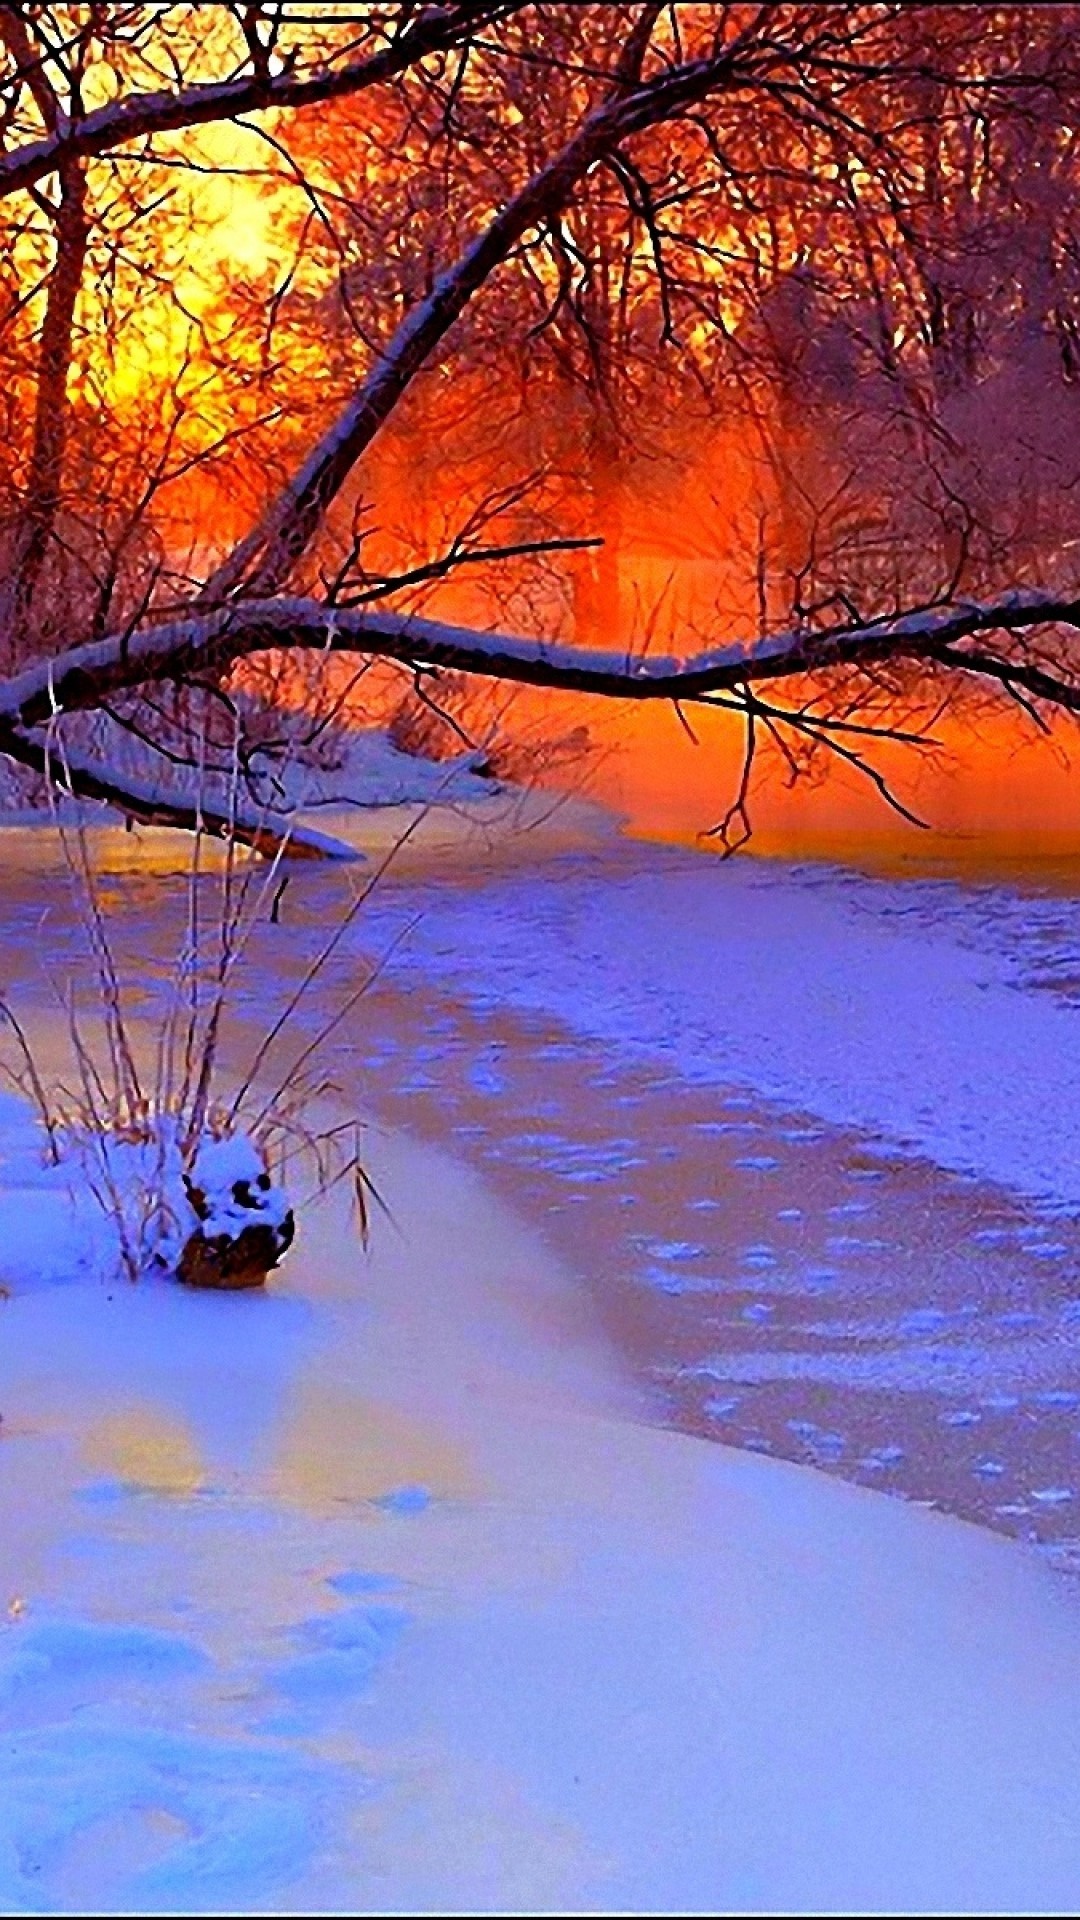 1080x1920 River, trees, sunset, winter wonderland, the whole package all together.